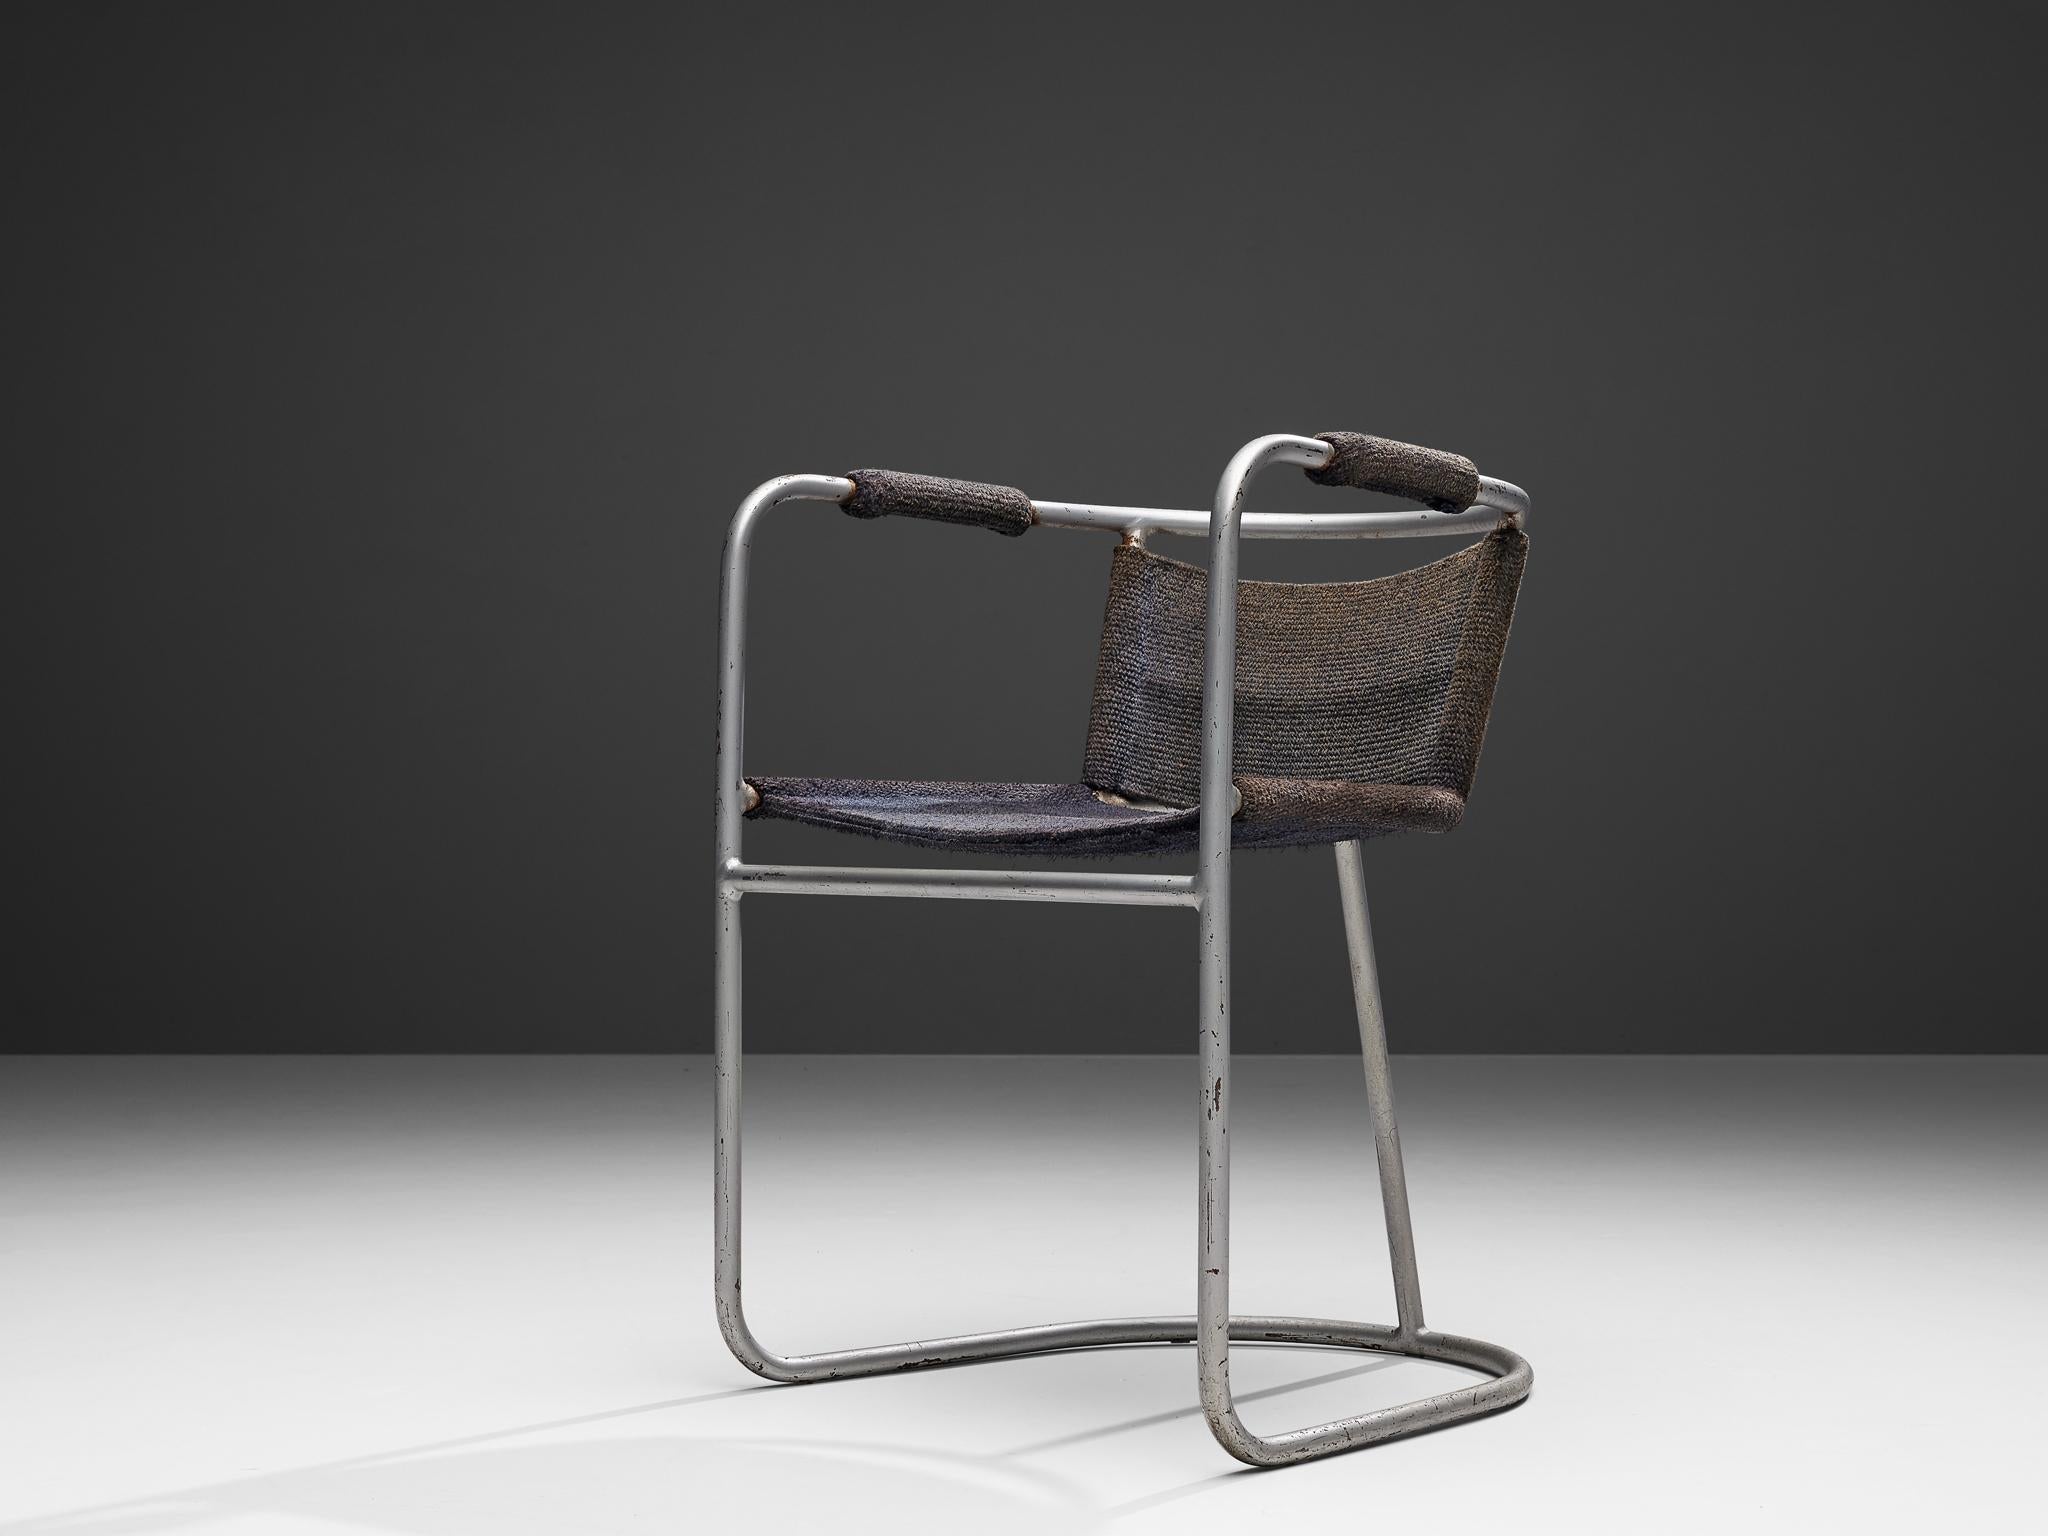 Bas Van Pelt for EMS, armchair, steel, sisal, The Netherlands, 1930s

This original comfortable chair is designed by the Dutch interior and furniture designer Bas van Pelt (1900-1945) and was manufactured by E.M.S. Overschie. The construction of